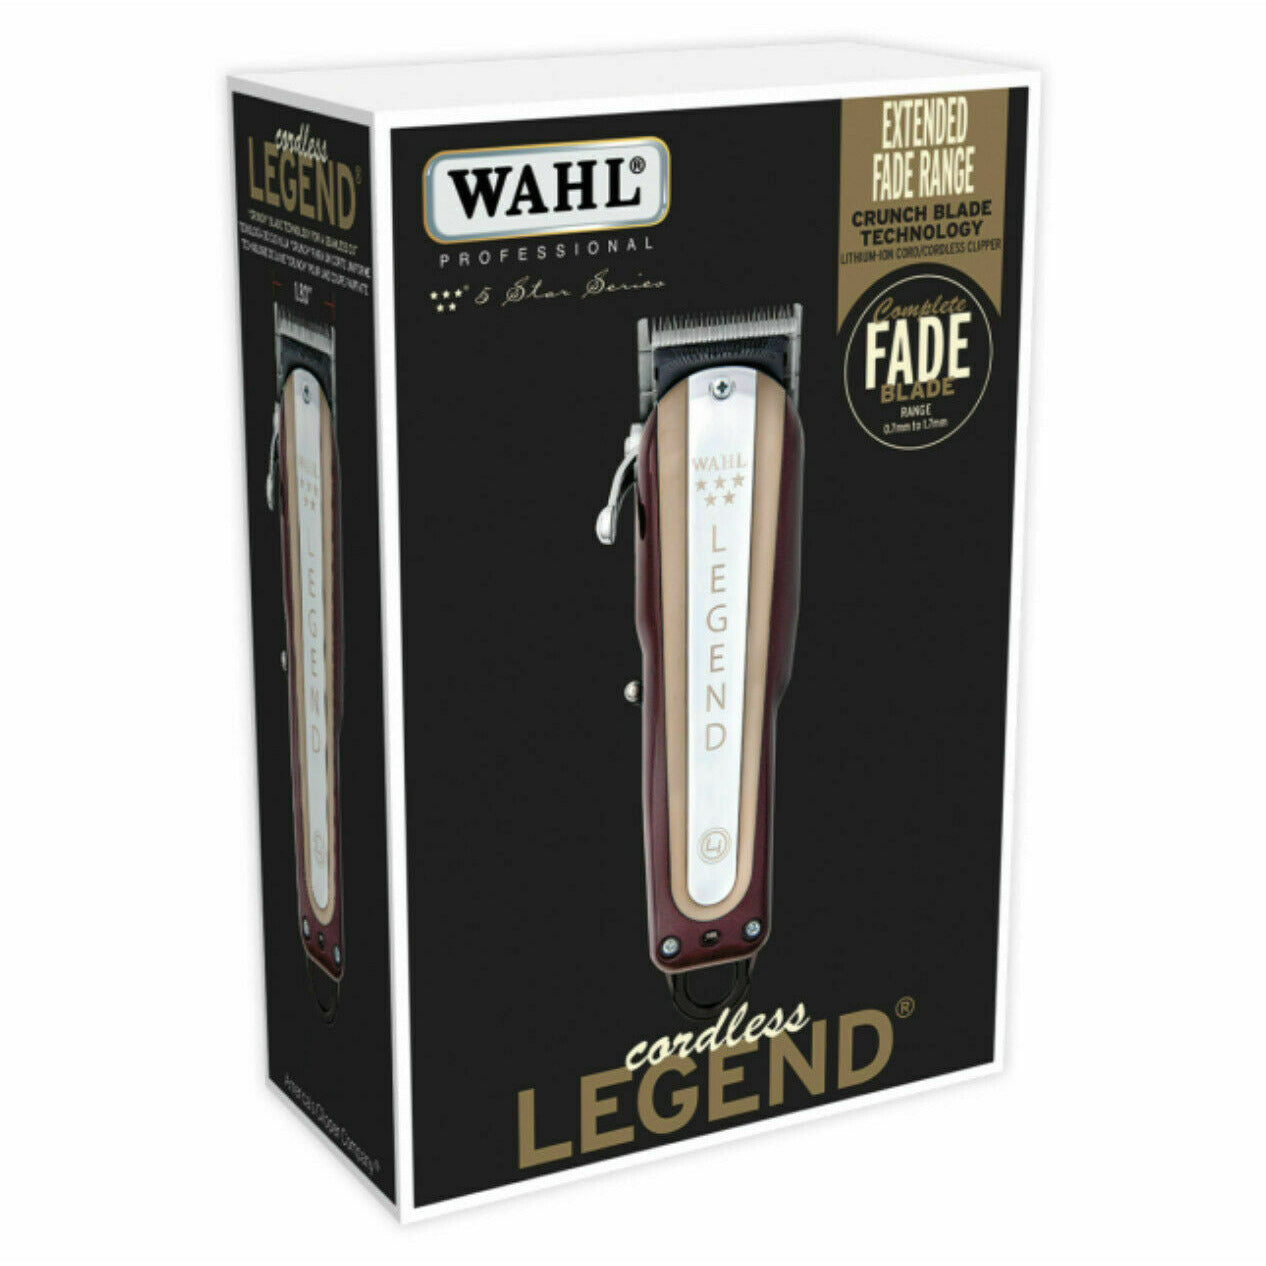 WAHL #8594 Professional 5-Star Series Cordless Legend Clipper Lithium-Ion